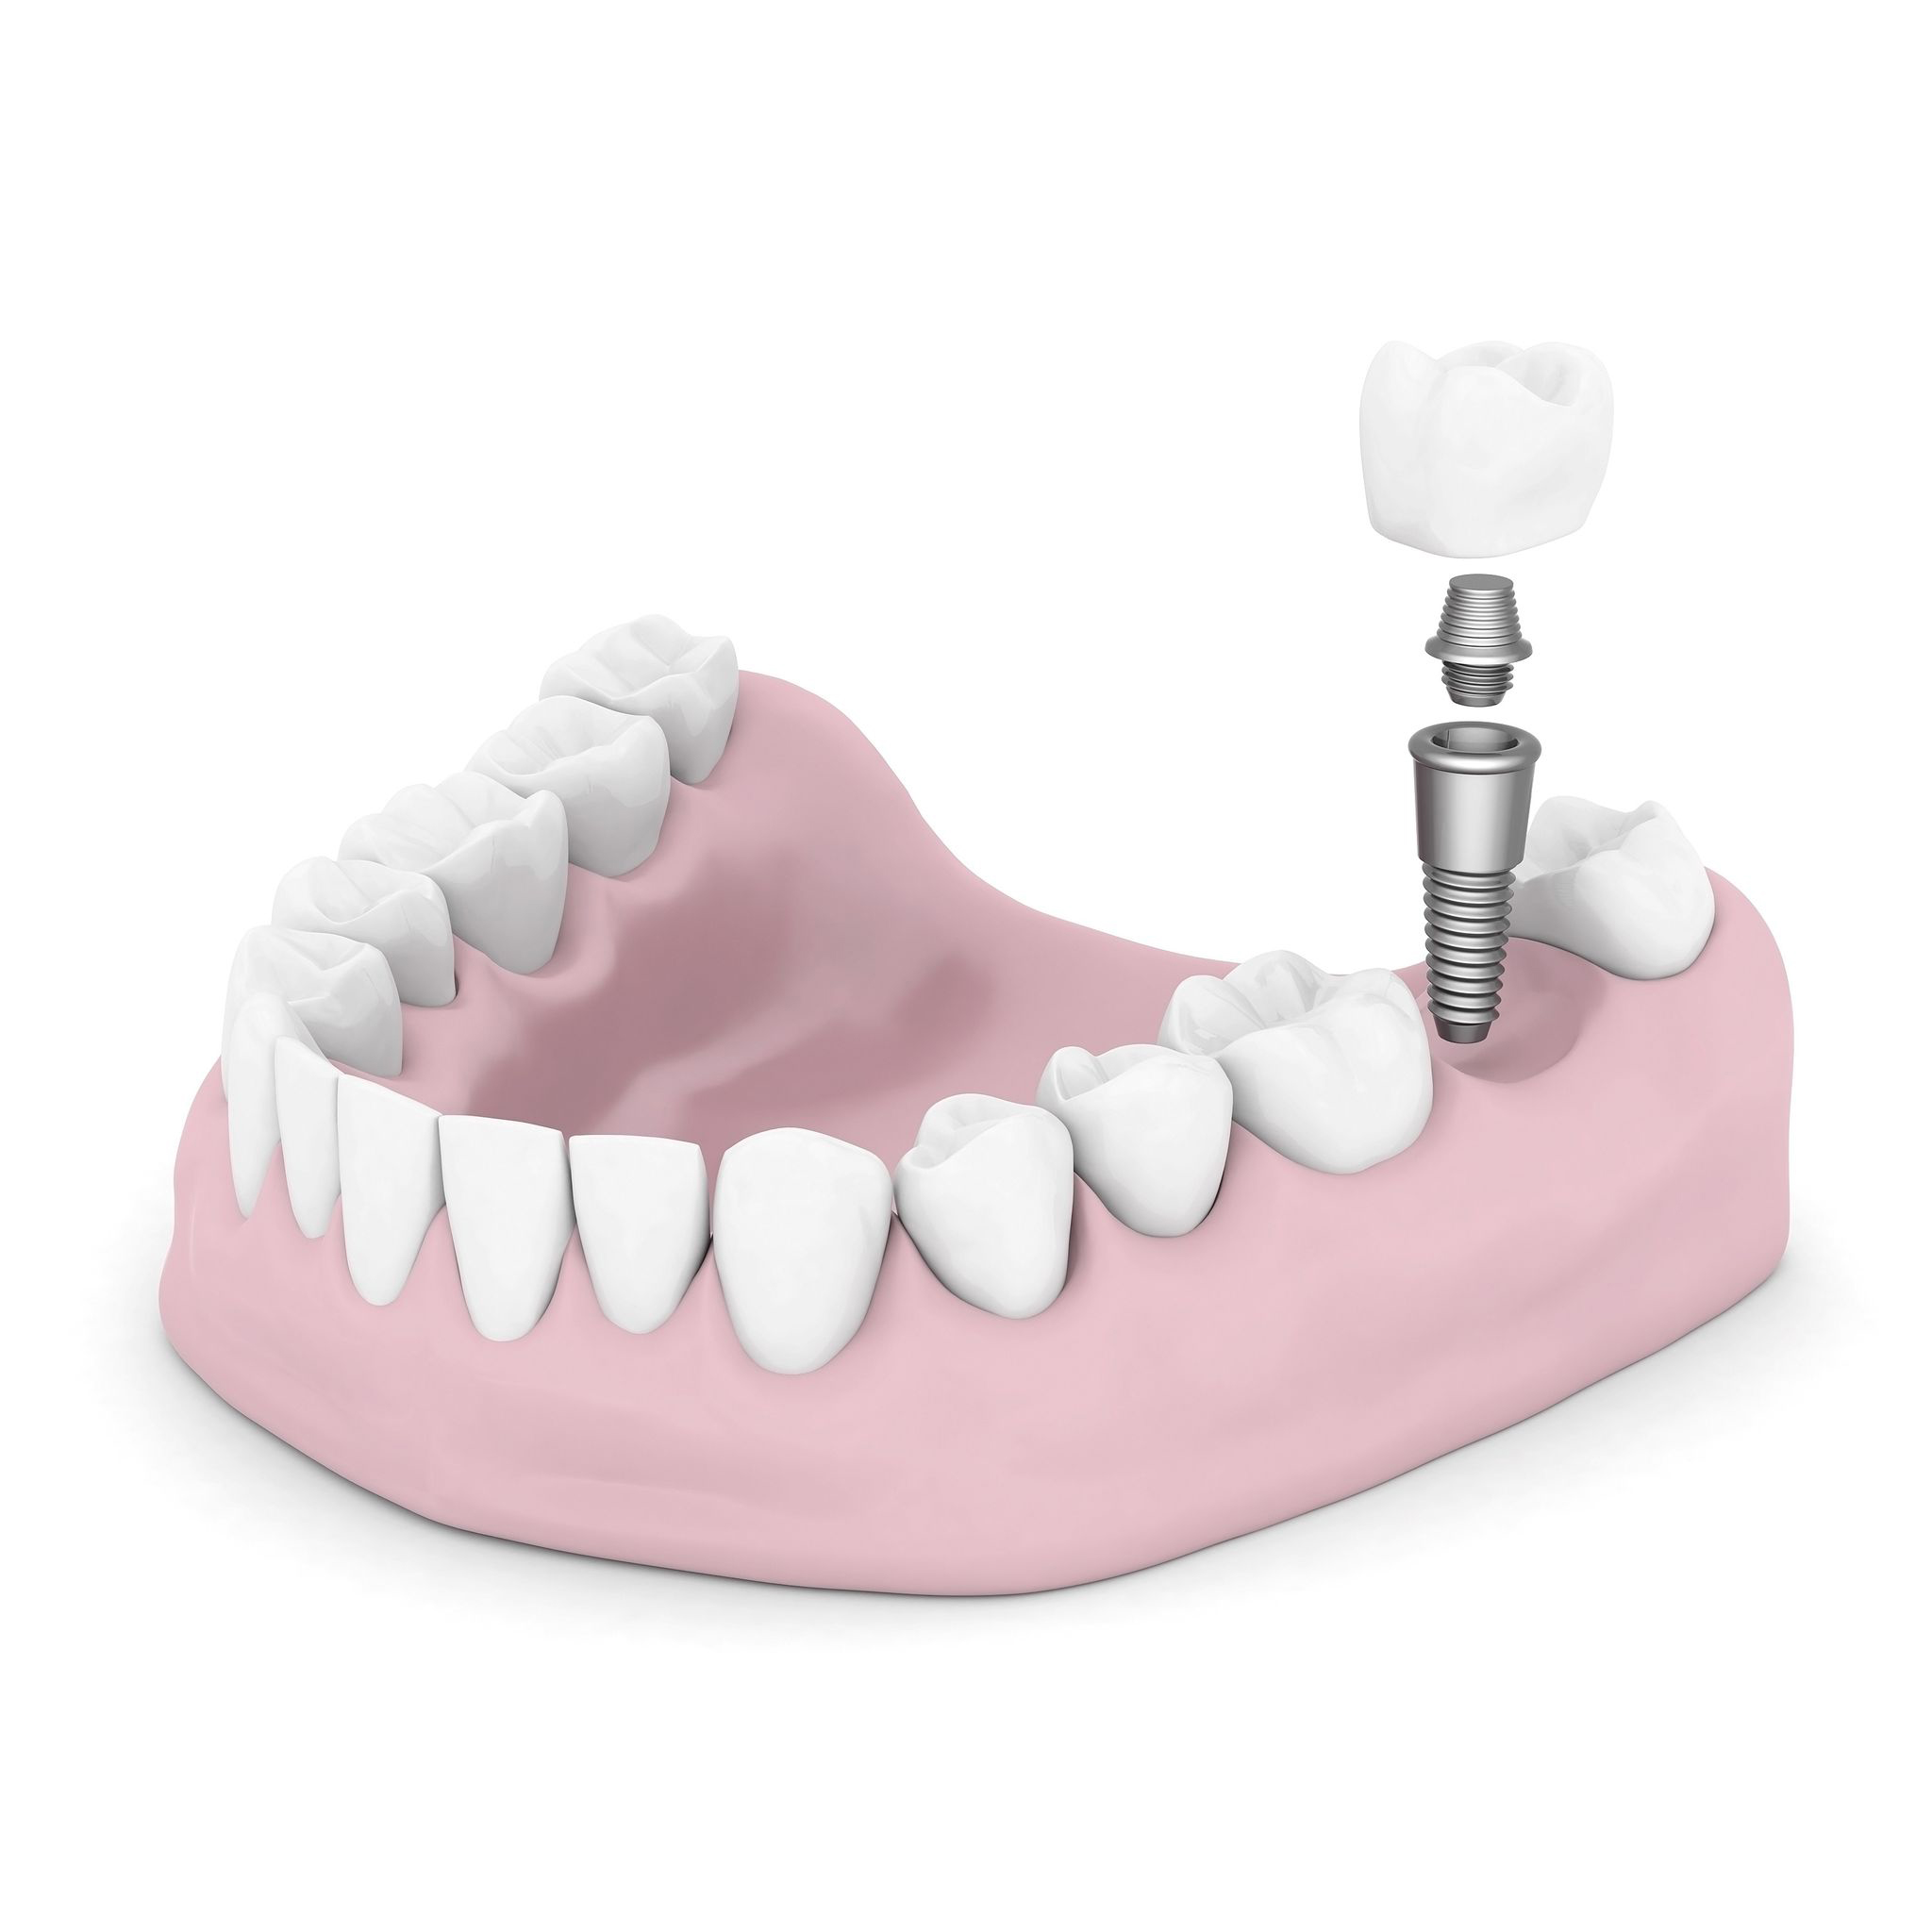 Where can I find Fort Lauderdale Dental Implants?